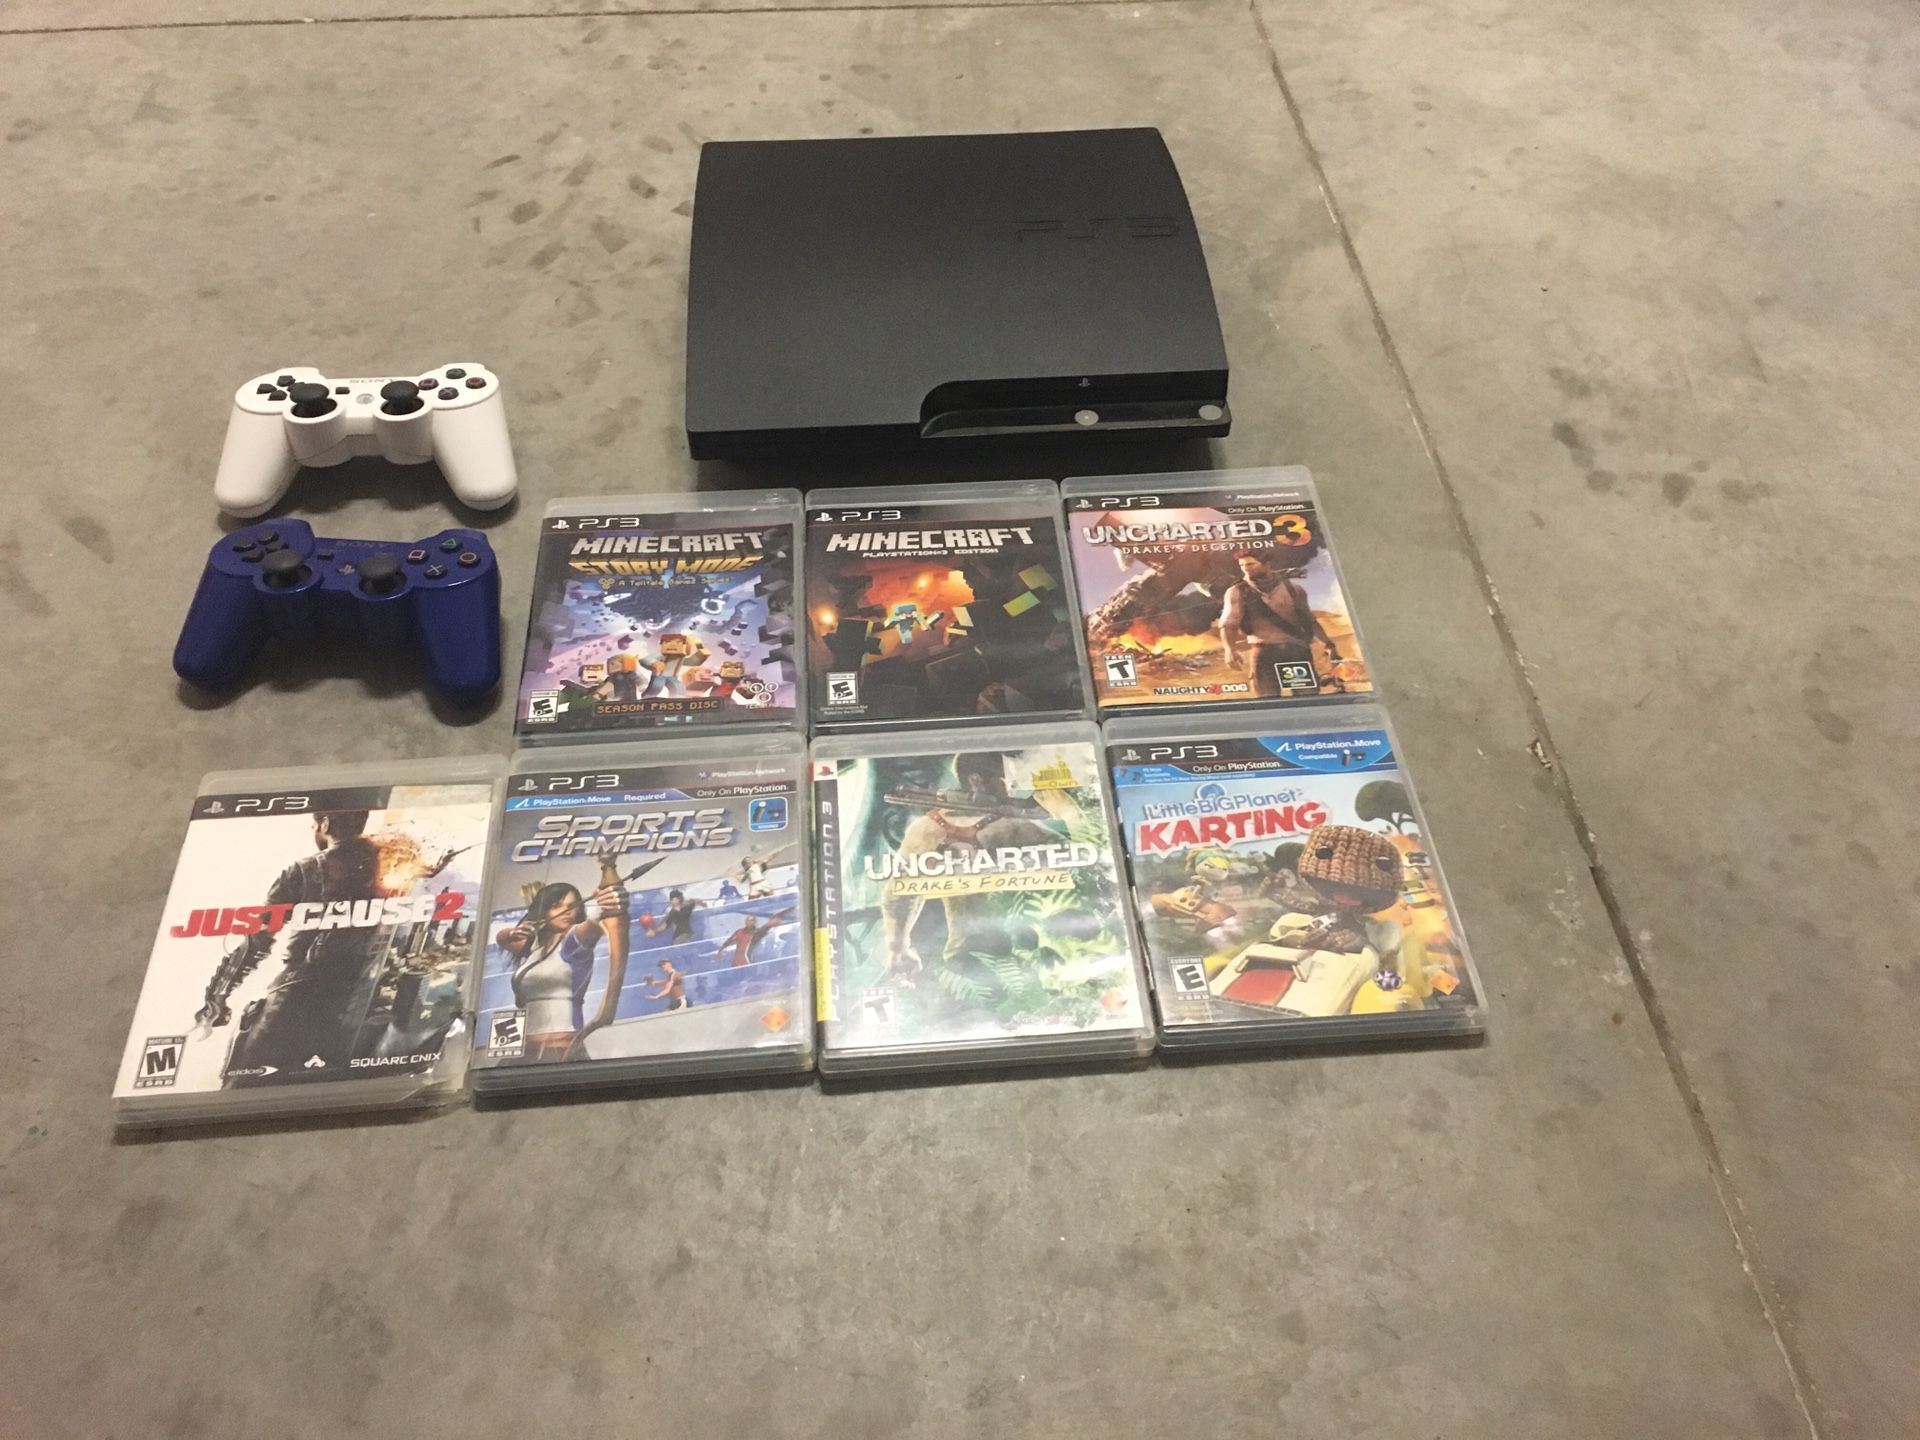 PS3 , 120gb comes with games and 2 controllers, works great still, Hardly ever gets use